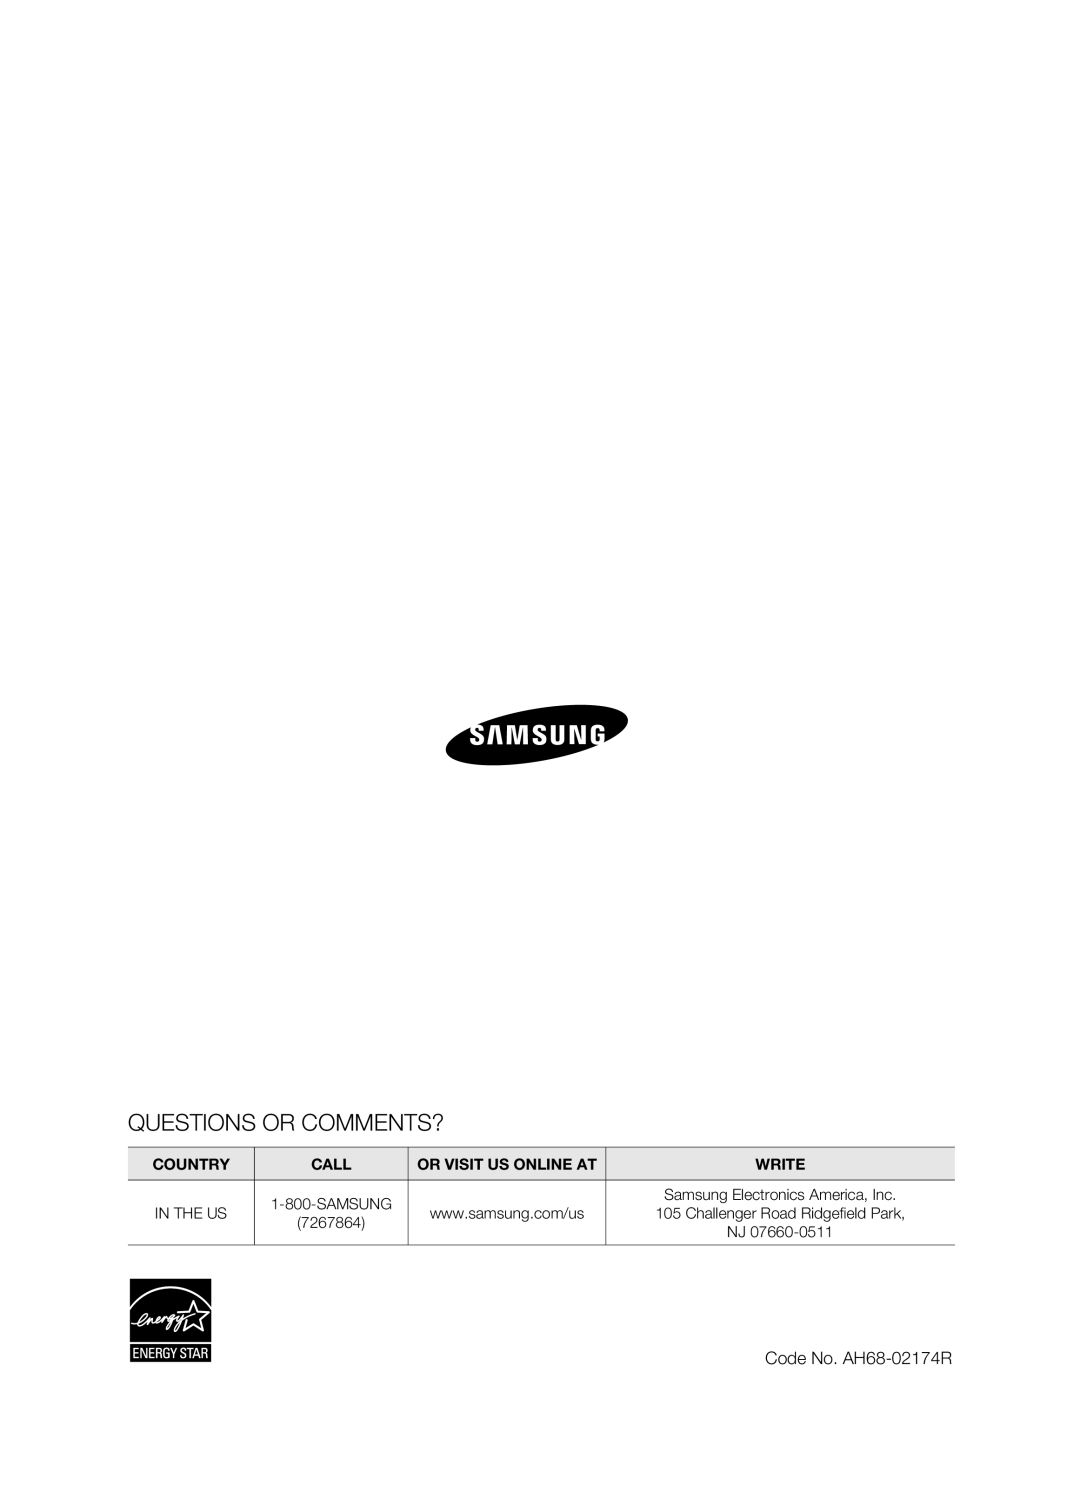 Samsung HT-AS730S Questions Or Comments?, Samsung Electronics America, Inc, Challenger Road Ridgefield Park, 7267864 